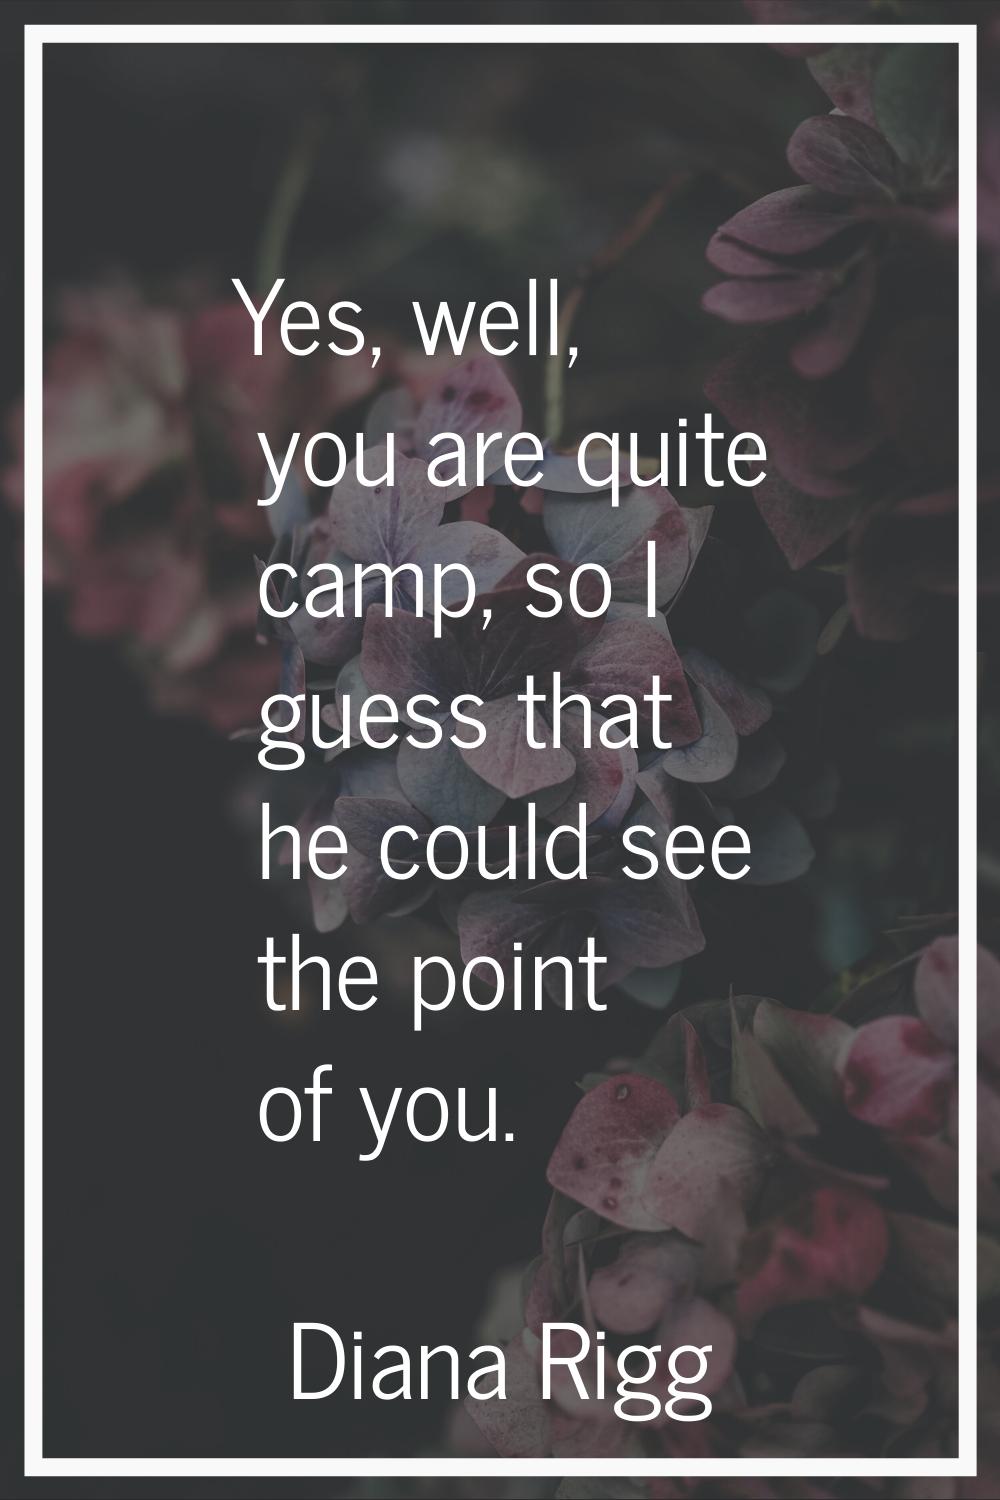 Yes, well, you are quite camp, so I guess that he could see the point of you.